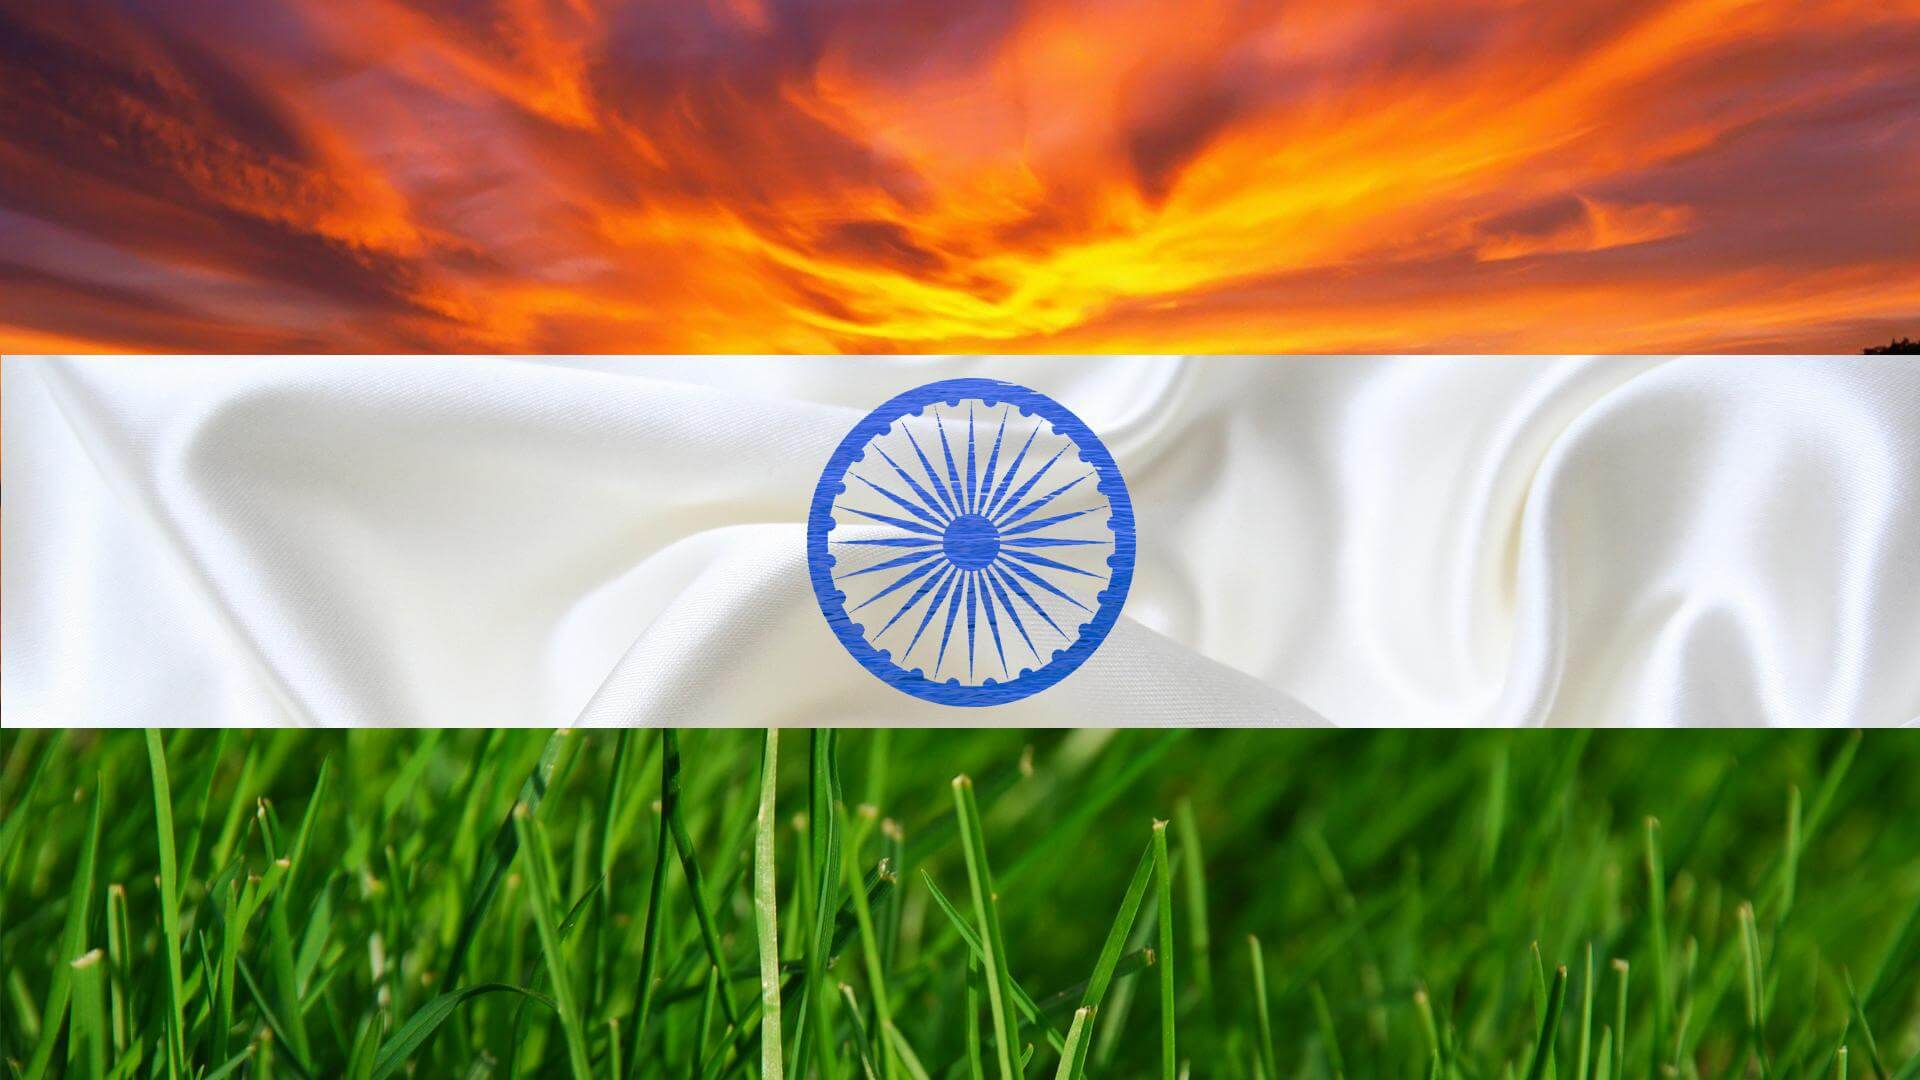 HD Indian Flag stock photo Image of deep tricolour  191576394